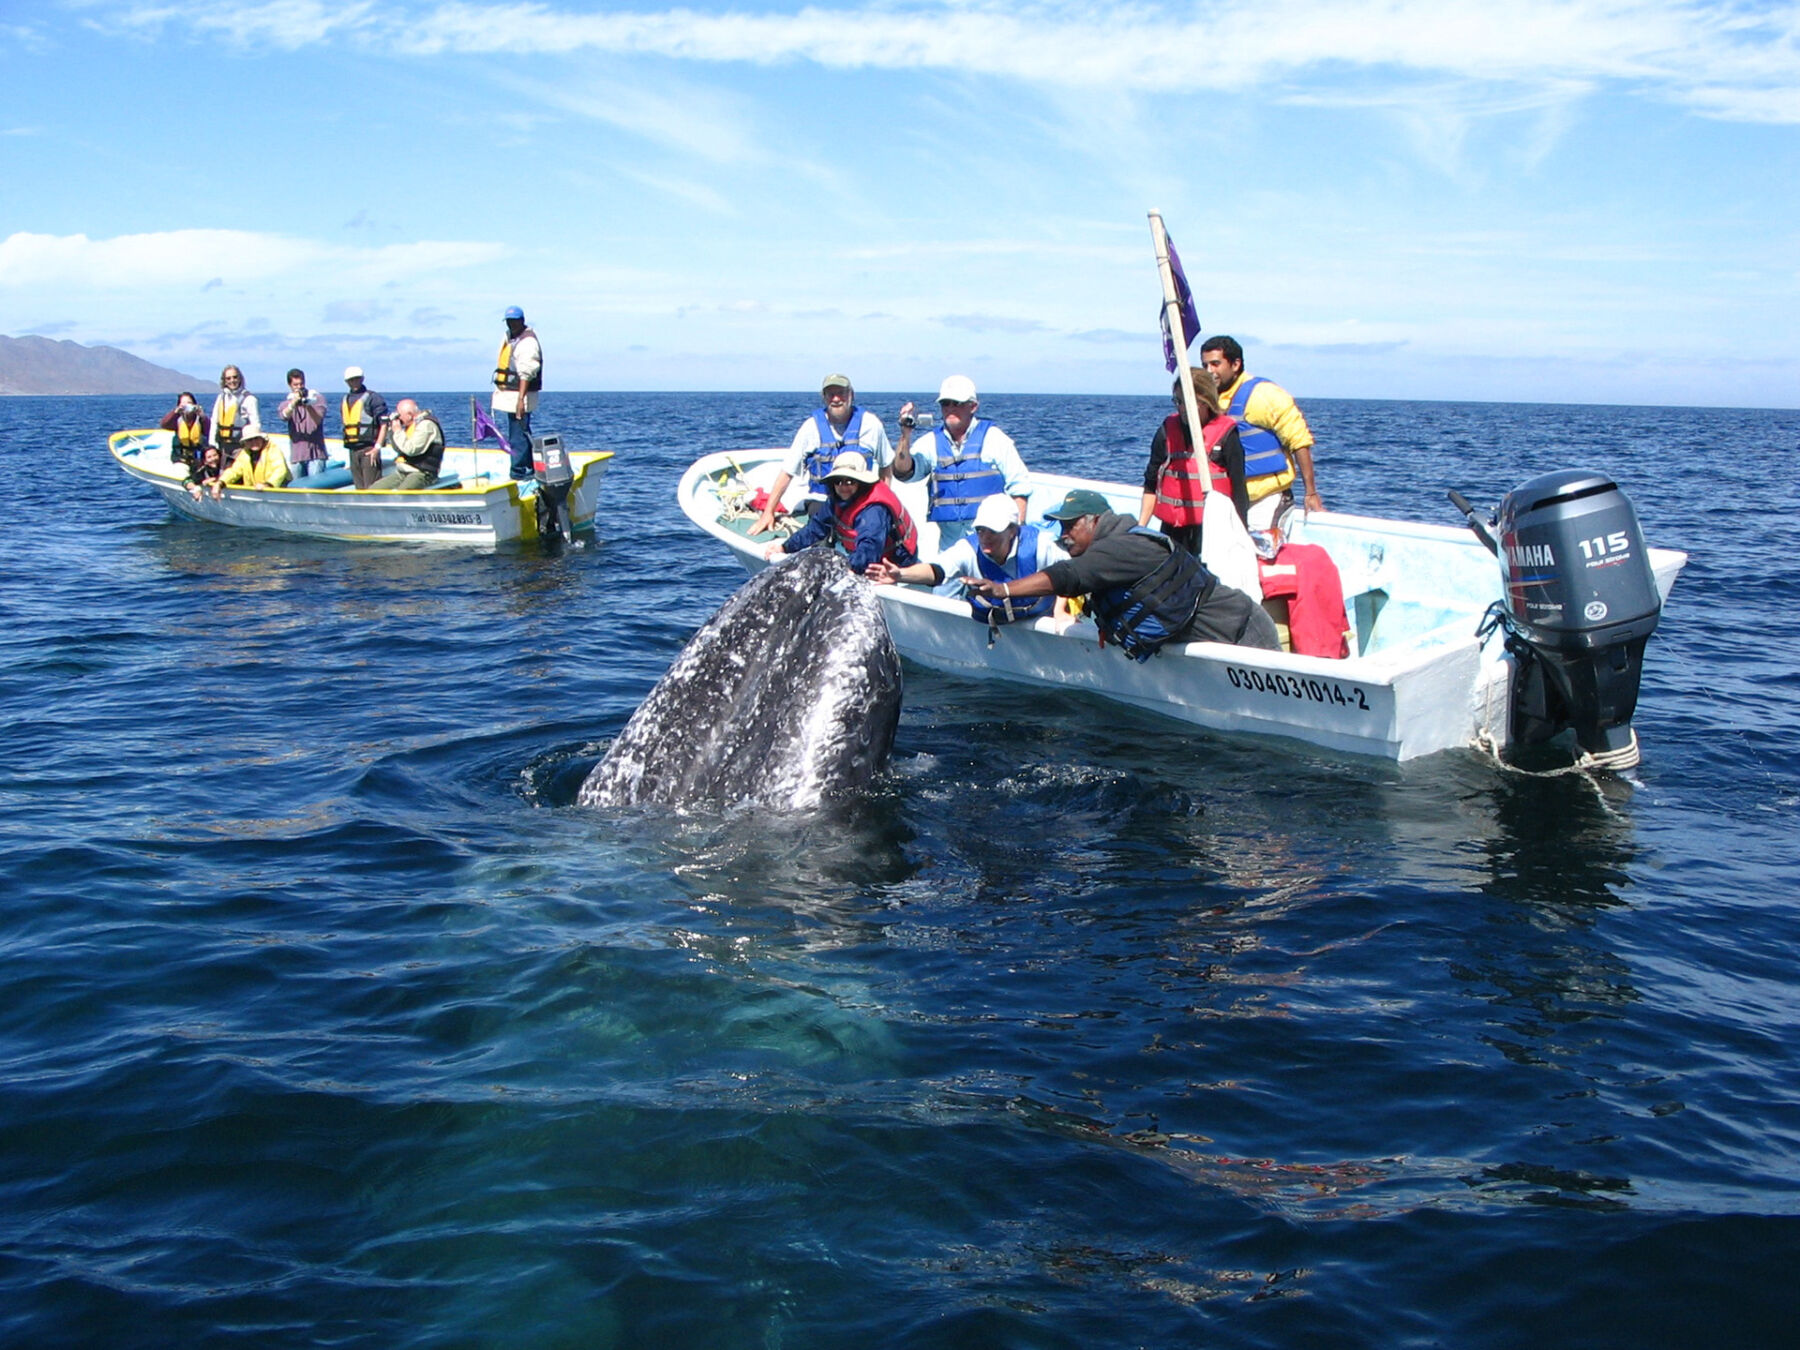 whale watching tour in skiff, Baja Mexico